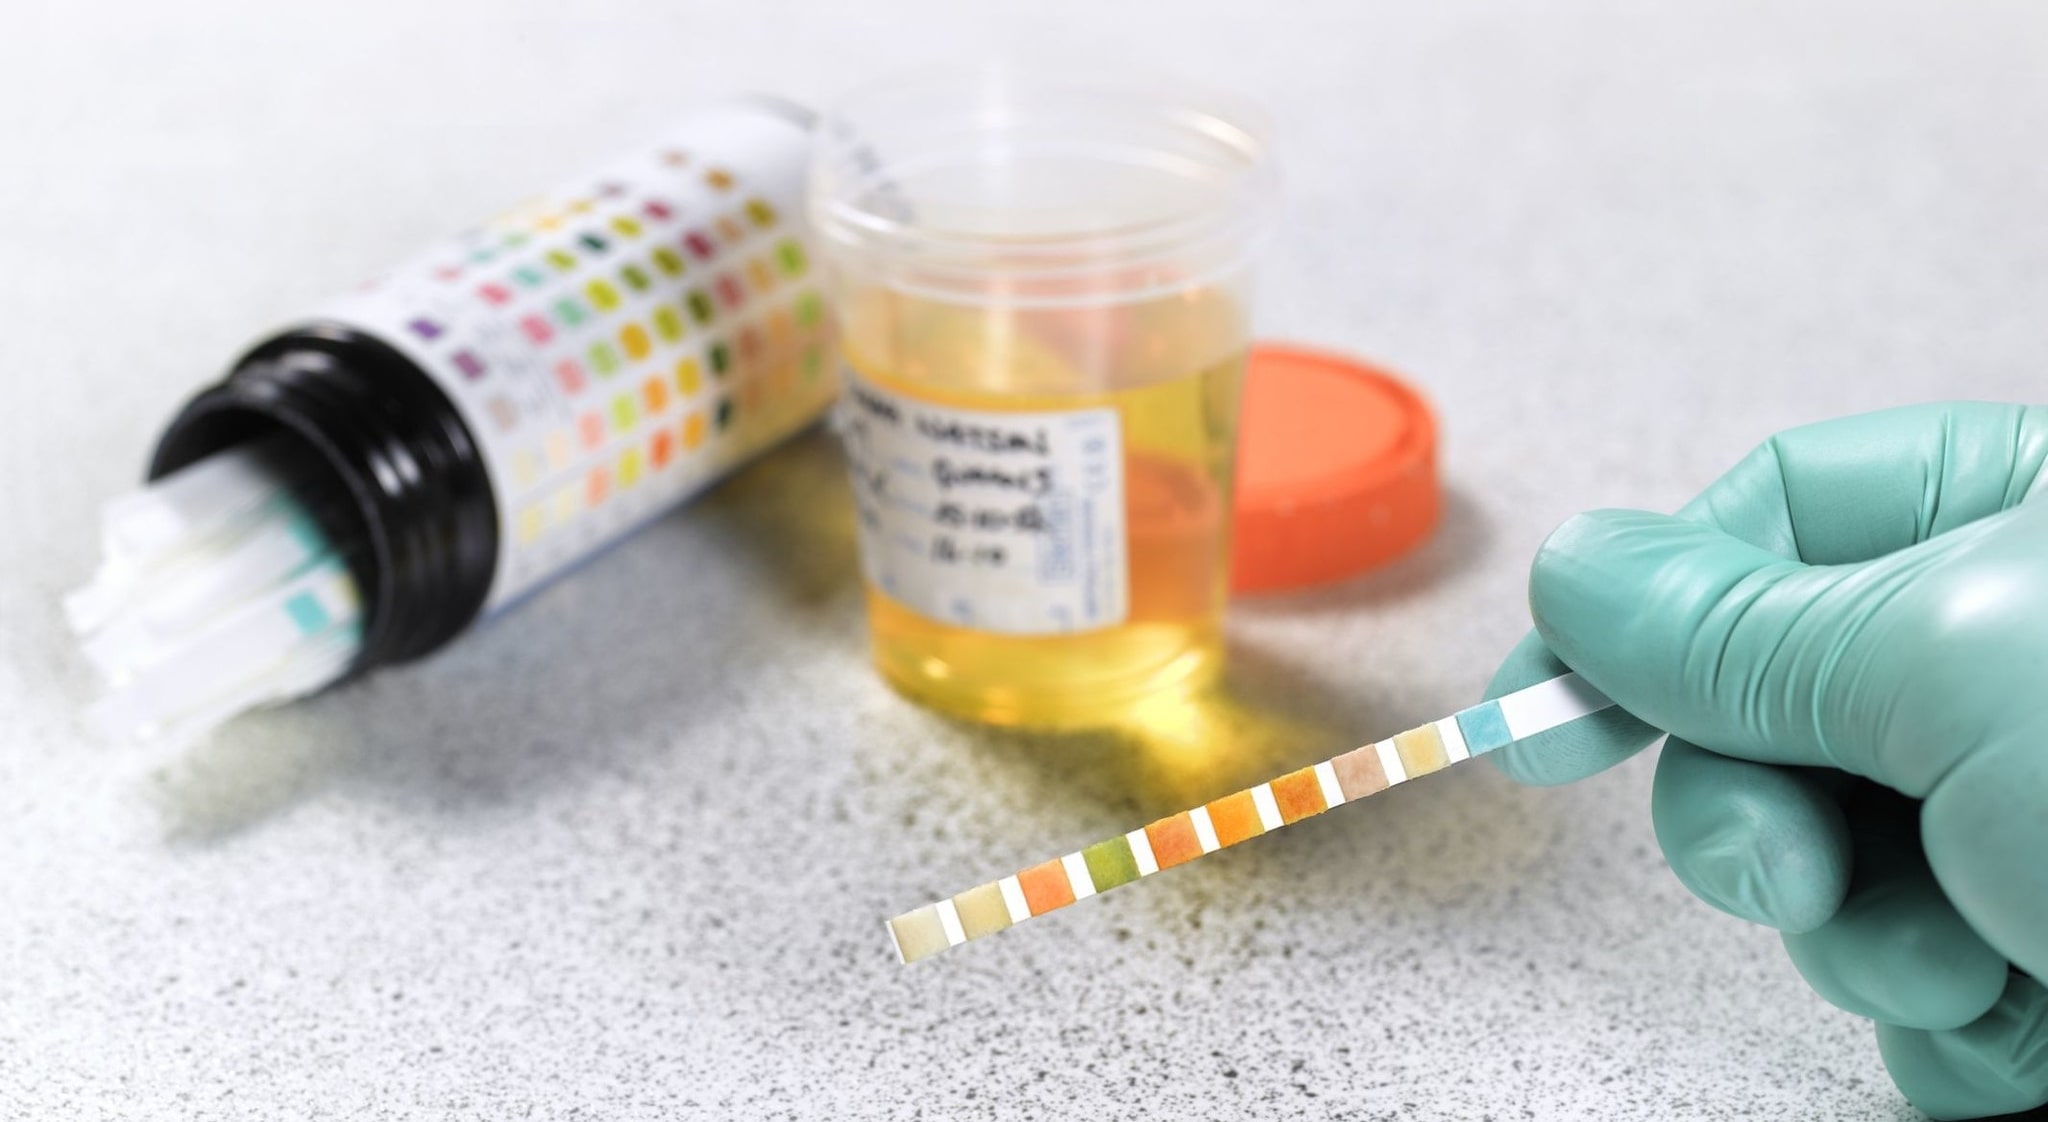 Improve your expertise about the best synthetic urine kits to buy online